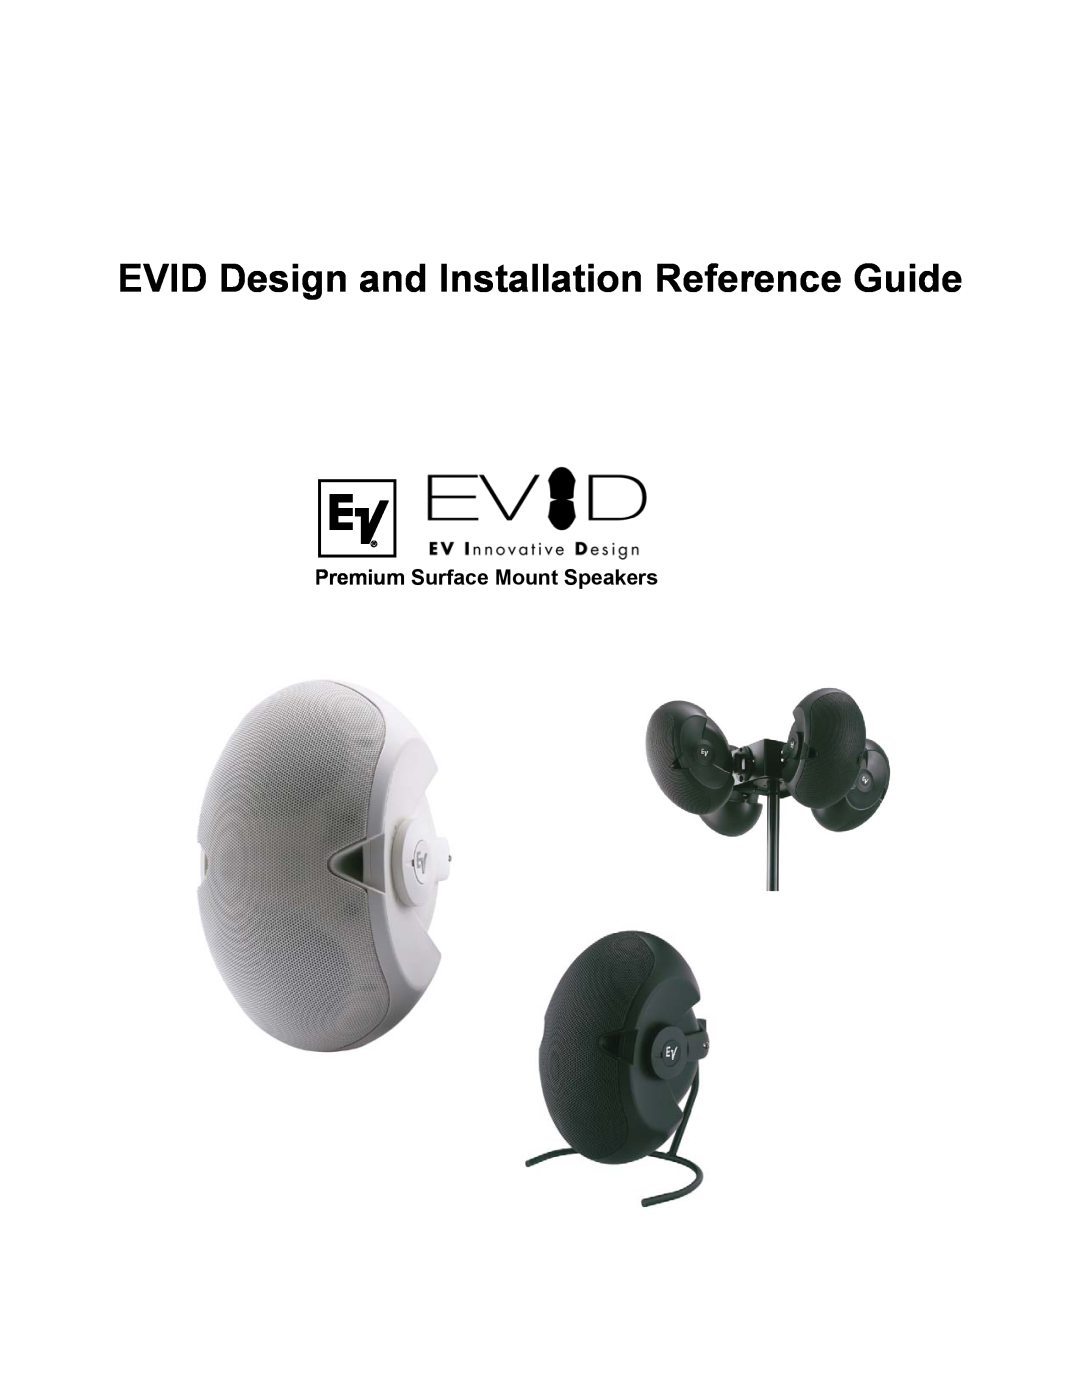 Electro-Voice Premium Surface Mount Speakers manual EVID Design and Installation Reference Guide 